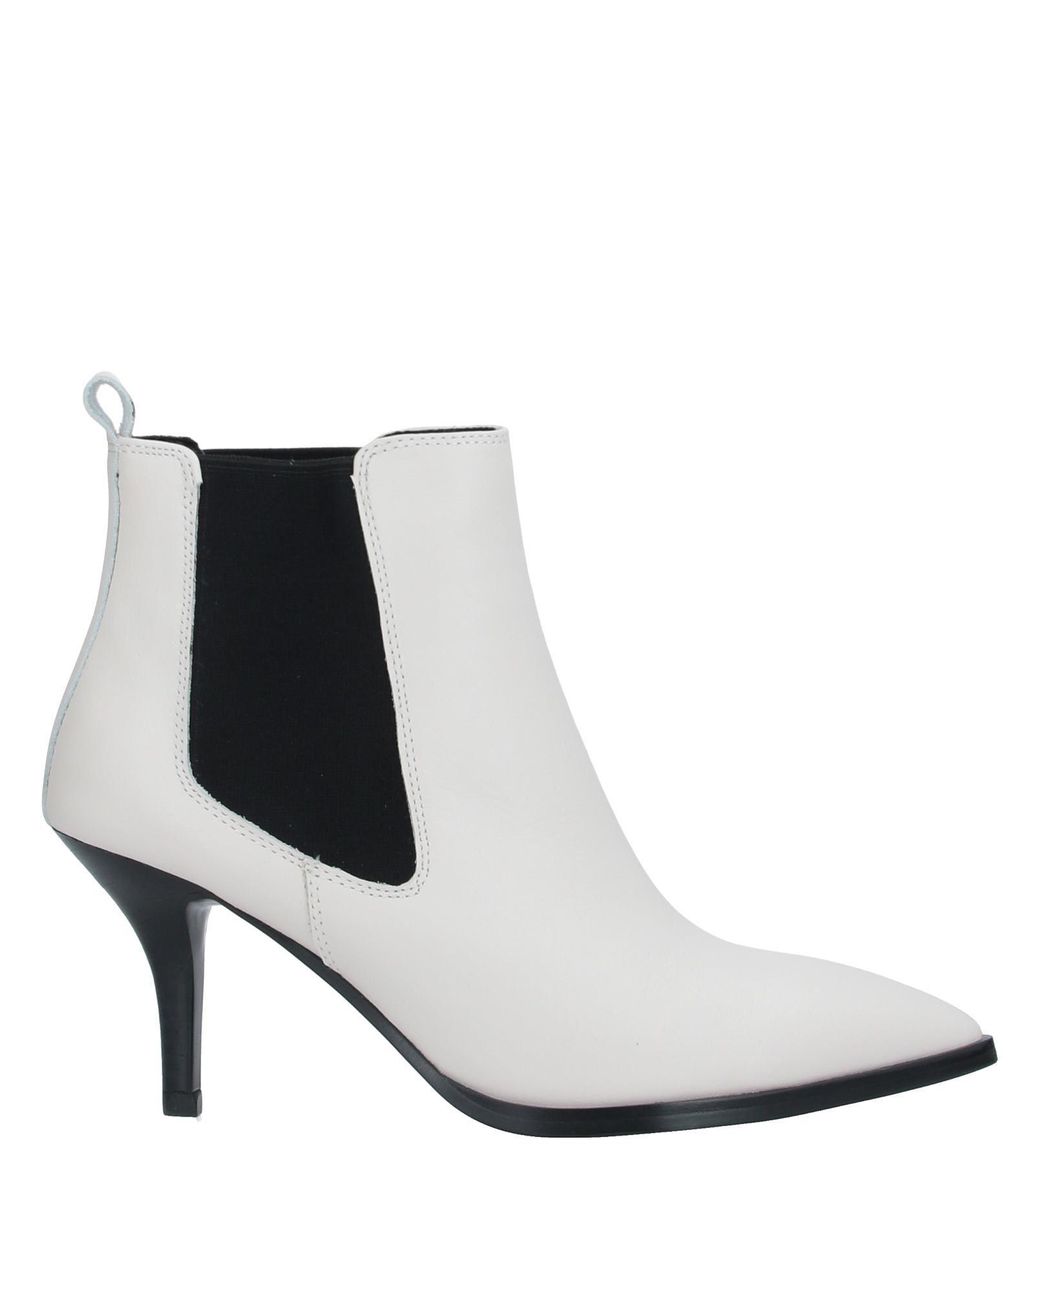 Bibi Lou Ankle Boots in White - Lyst